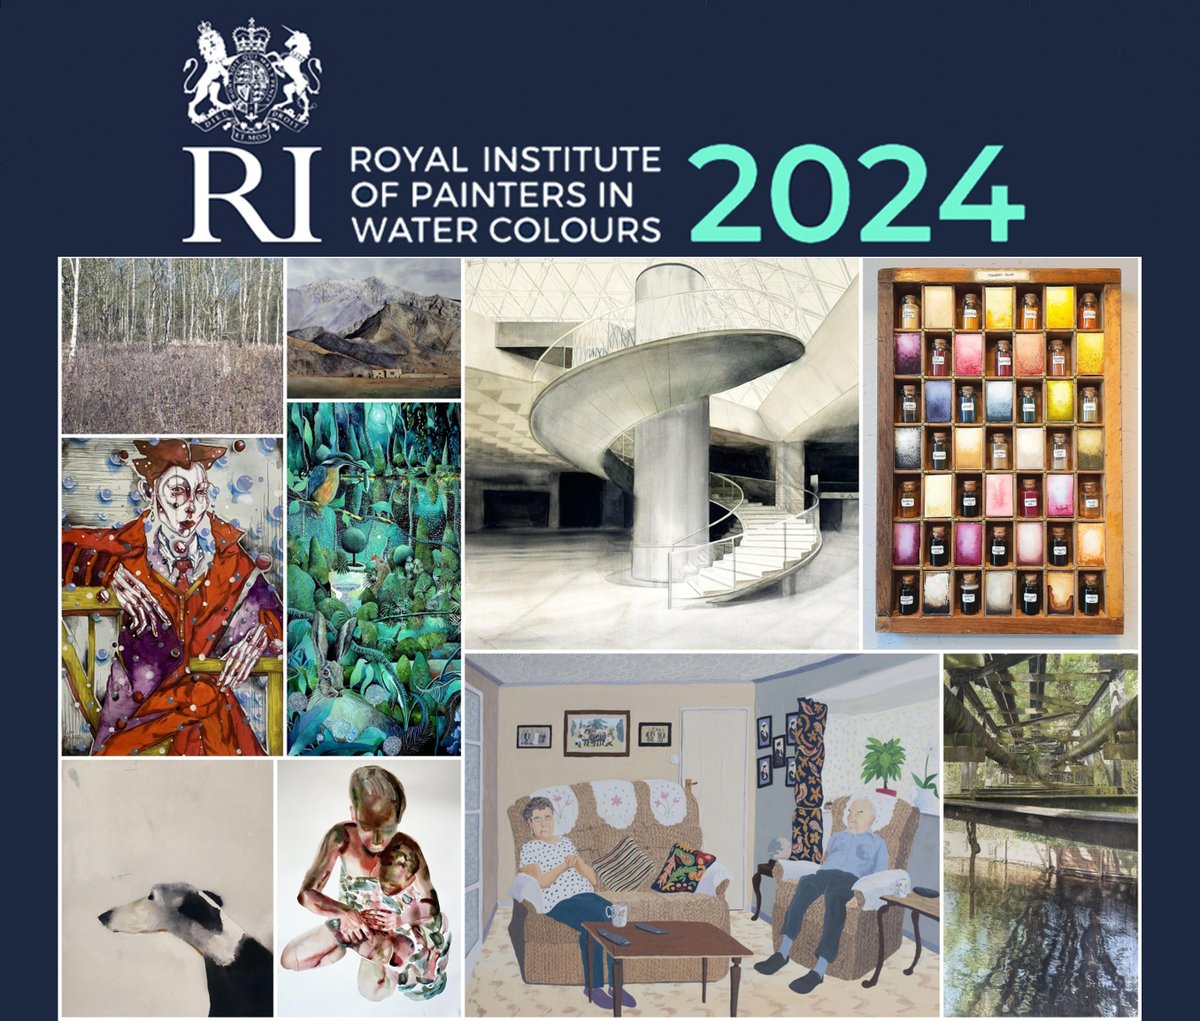 LAST DAY @RIwatercolours @mallgalleries The 212th Annual Exhibition of the Royal Institute of Painters in Water Colours is drawing to a close today at 5pm. A fabulous exhibition. Online exhibition: buyart.mallgalleries.org.uk